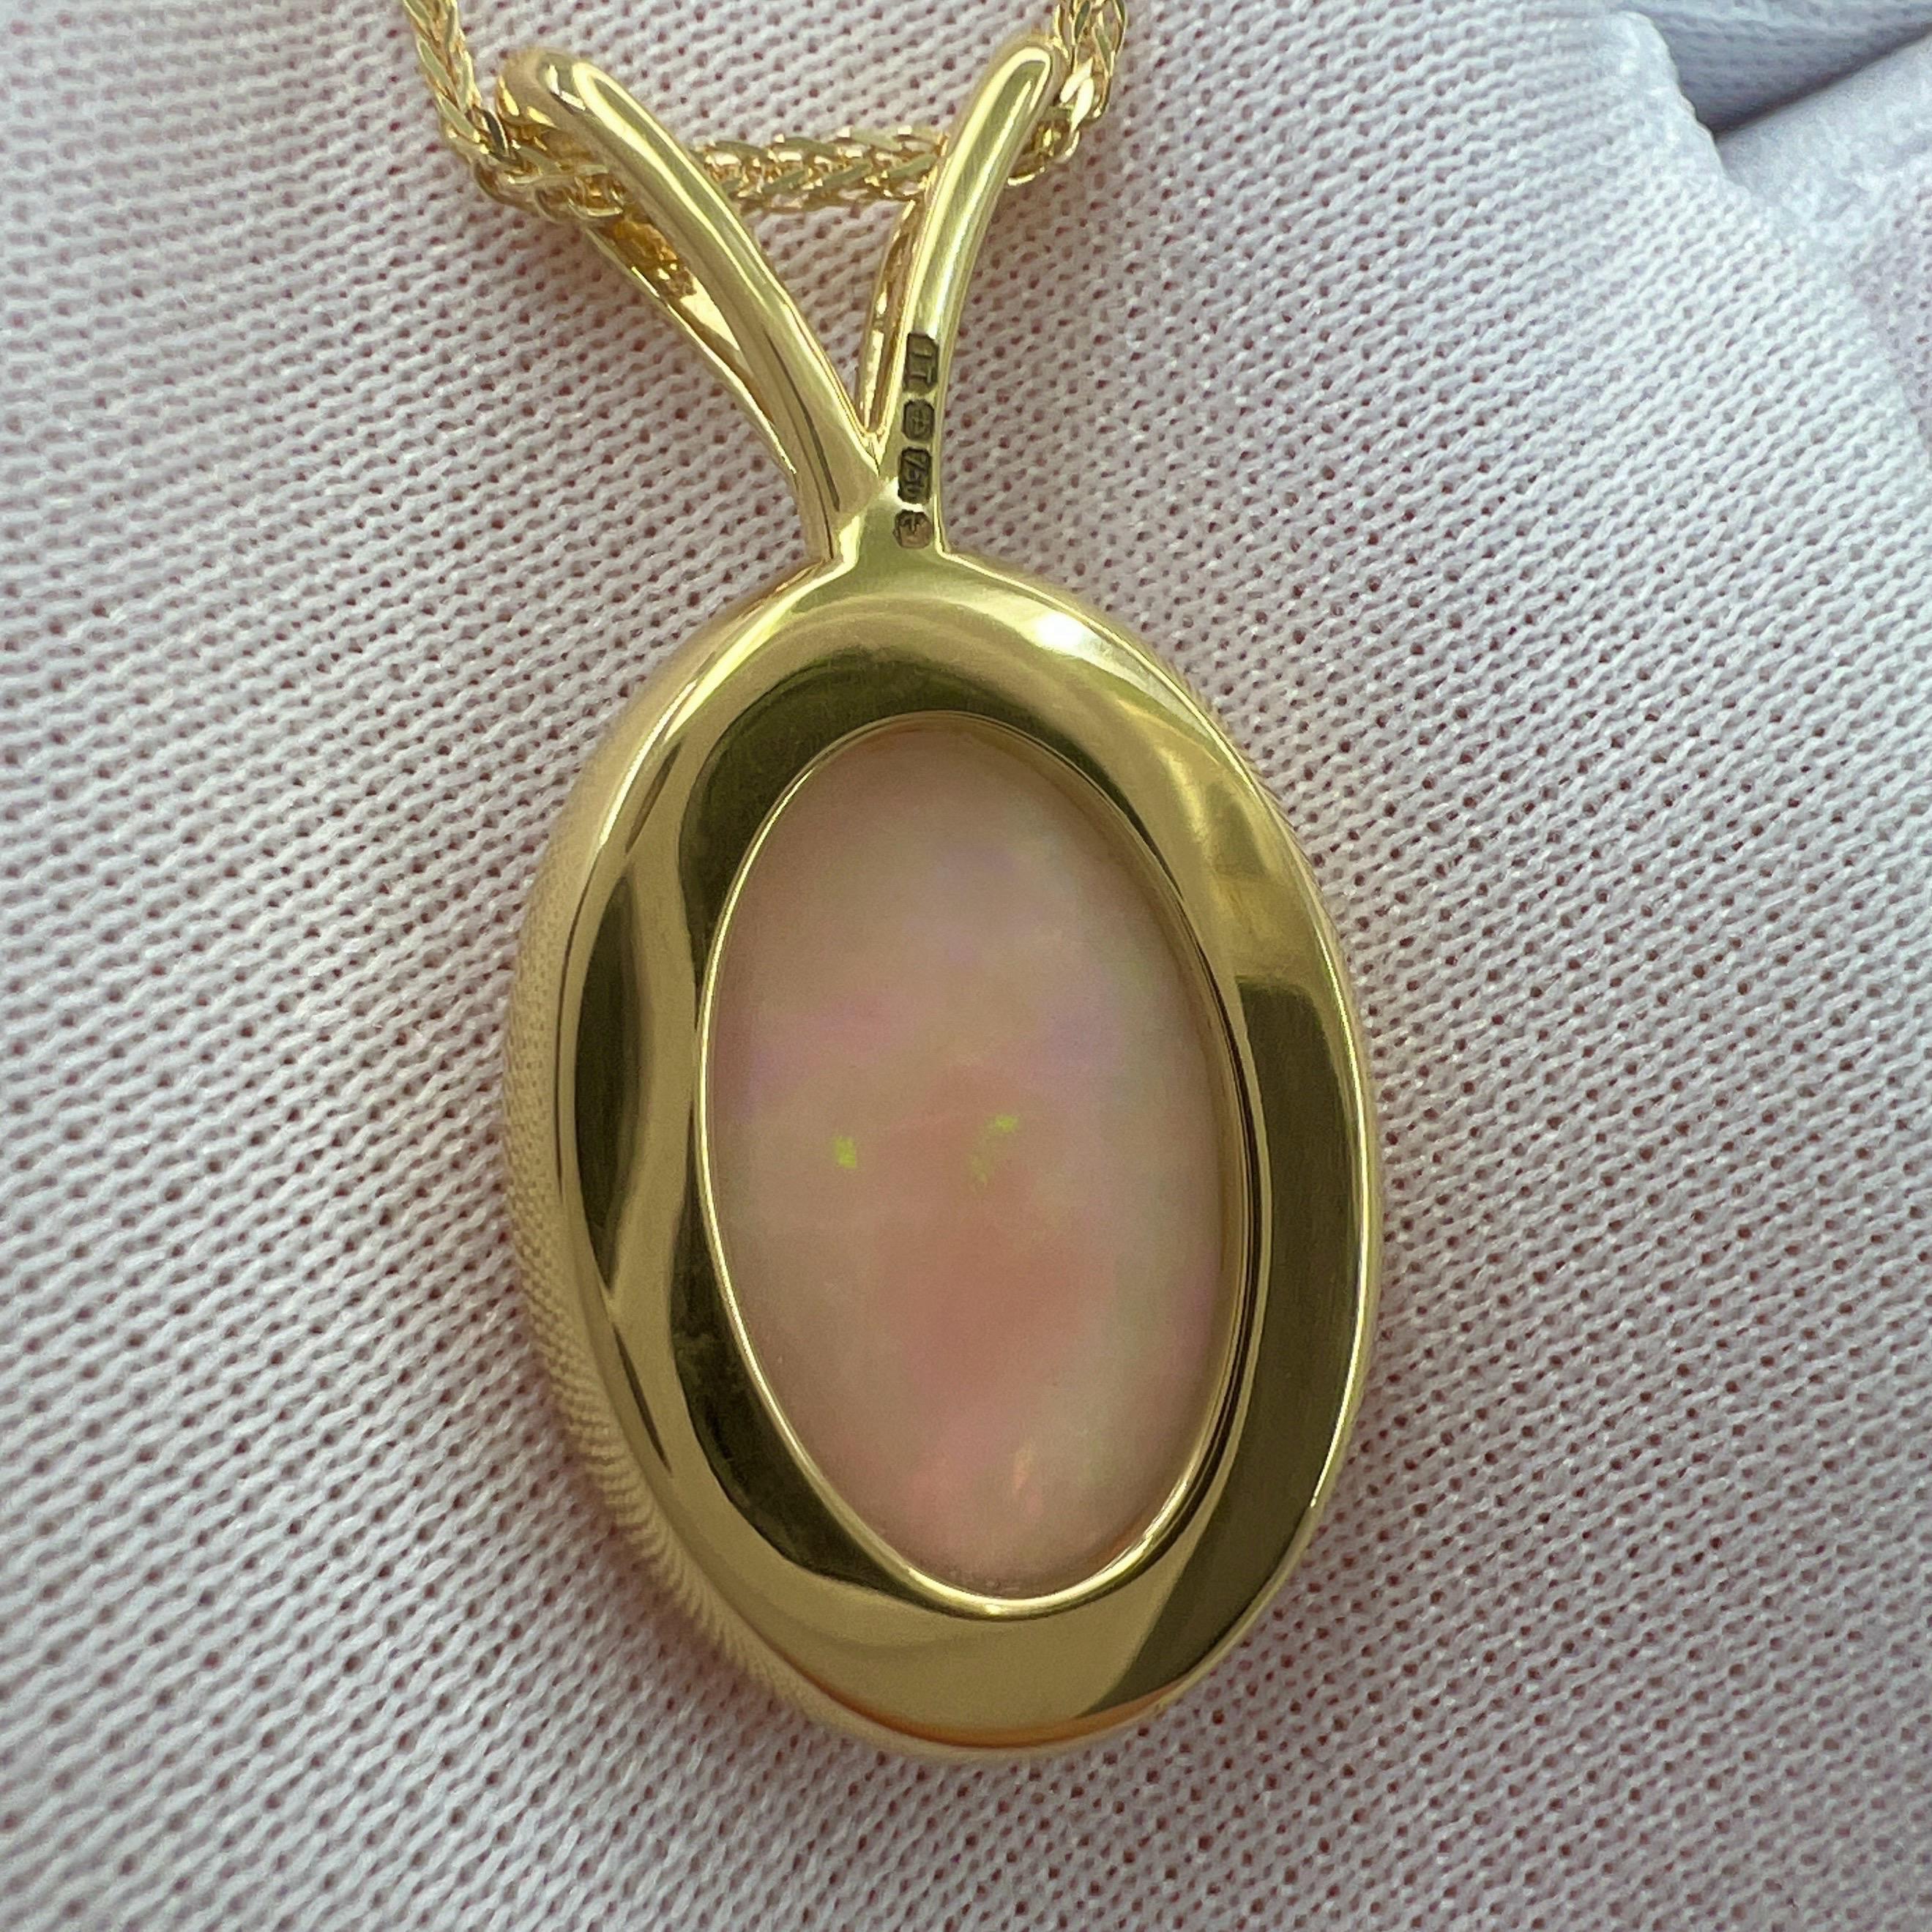 6.15ct Fine White Opal Oval Cabochon 18k Yellow Gold Bezel Pendant Necklace For Sale 6